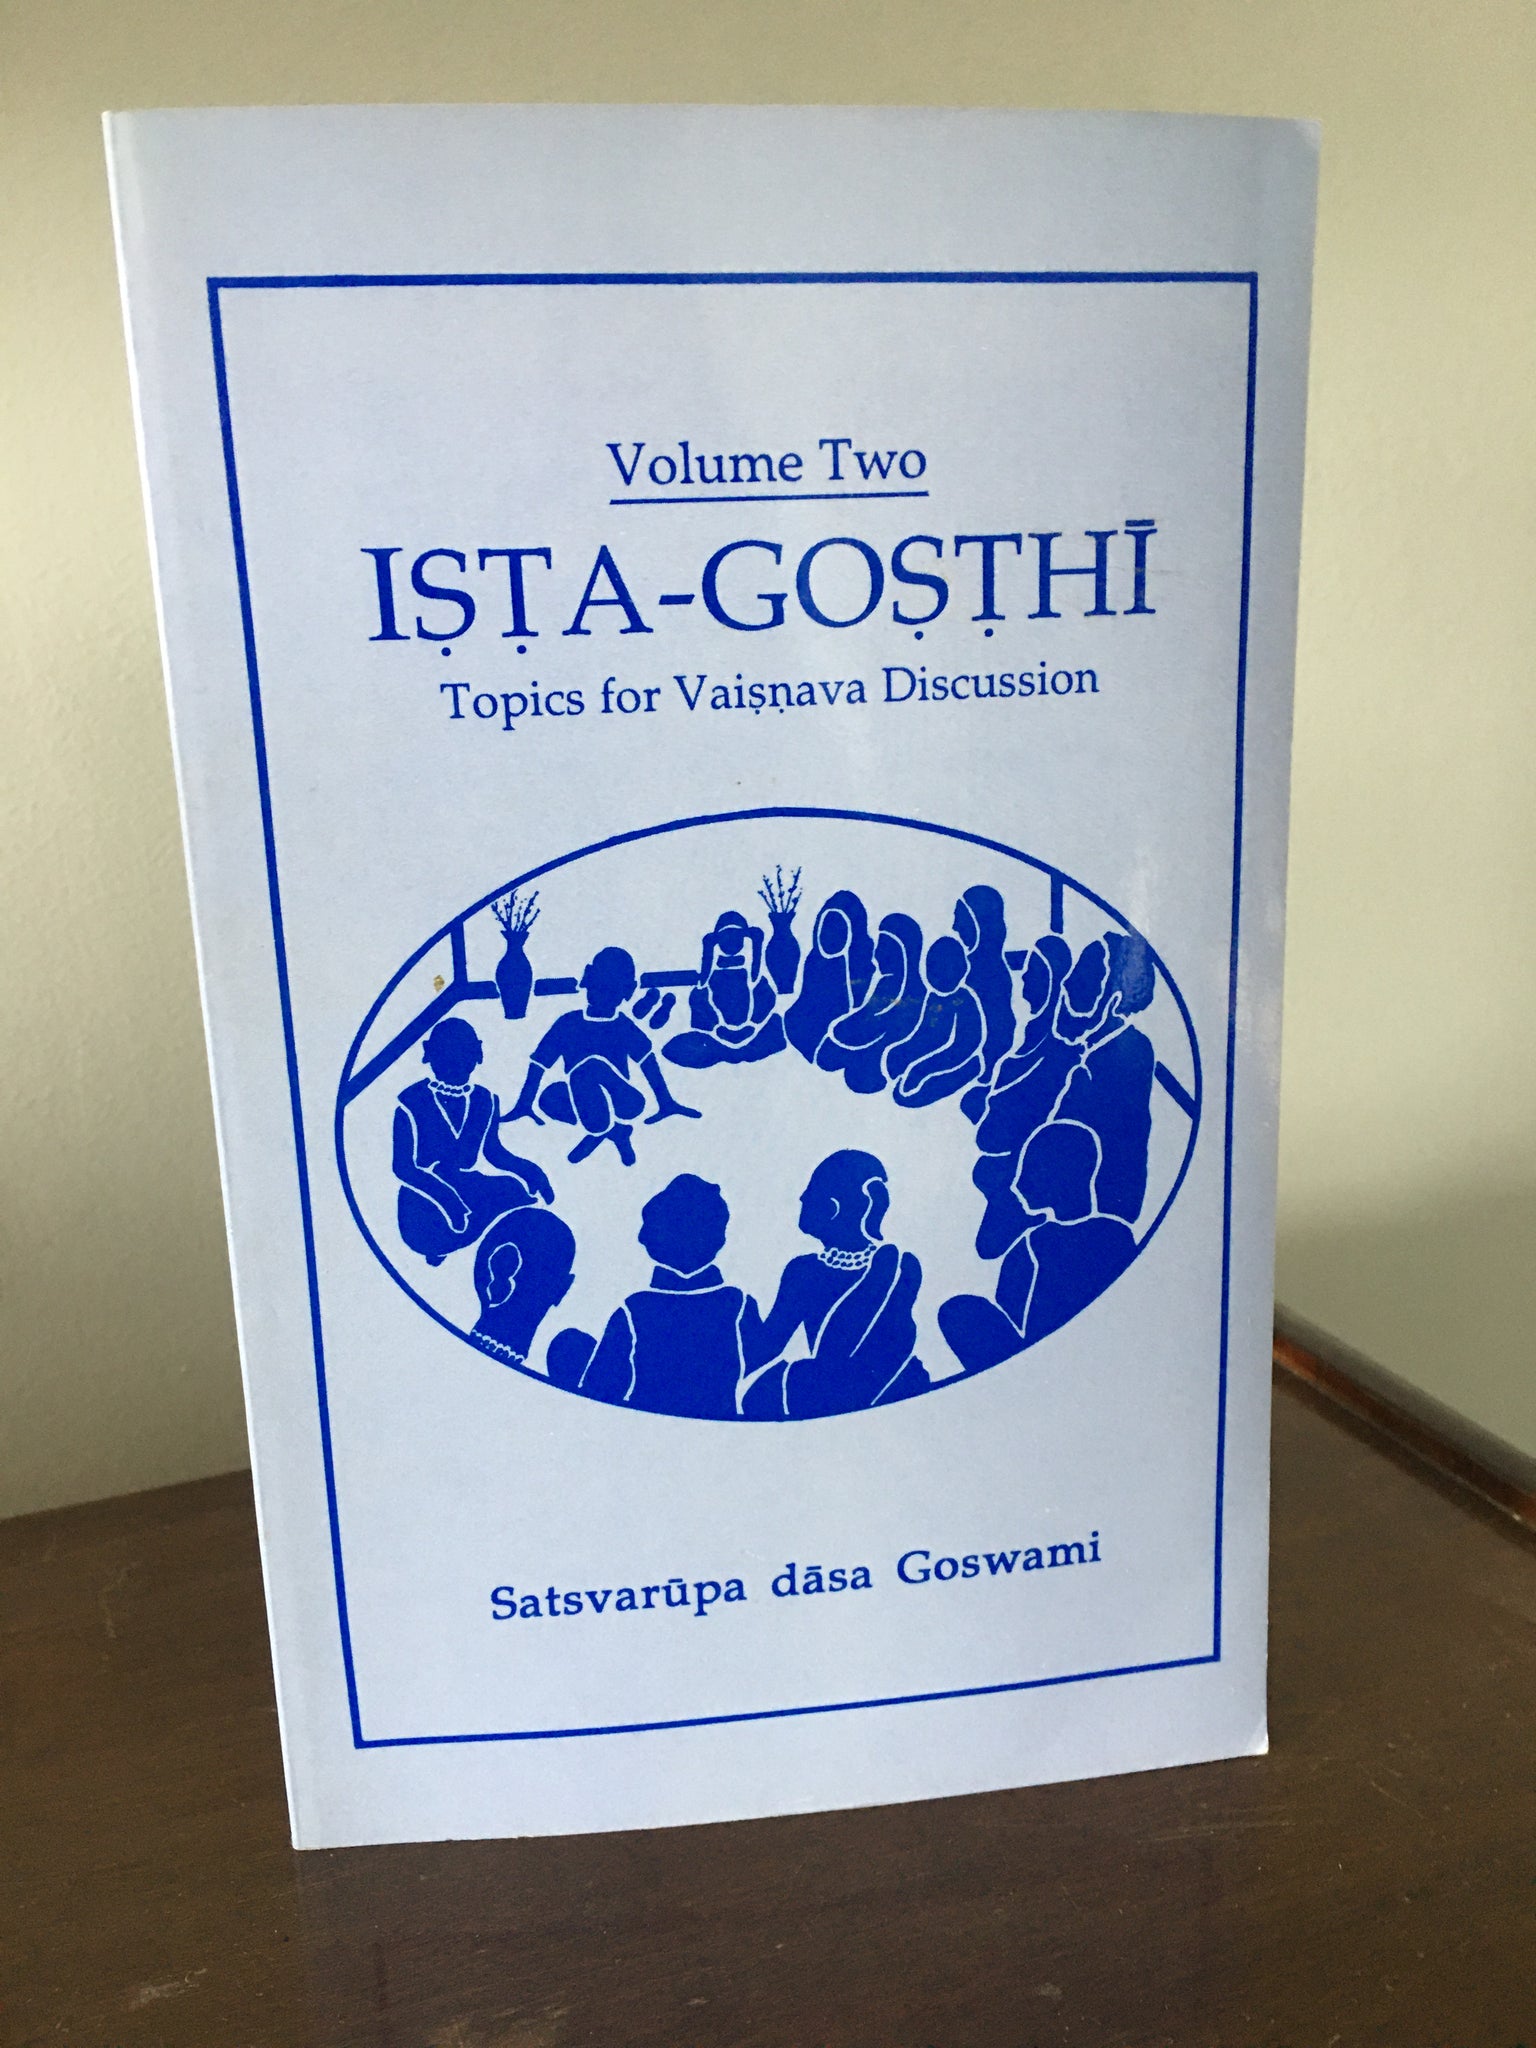 Ista-Gosthi  volume two  Topics for Vaisnava Discussion